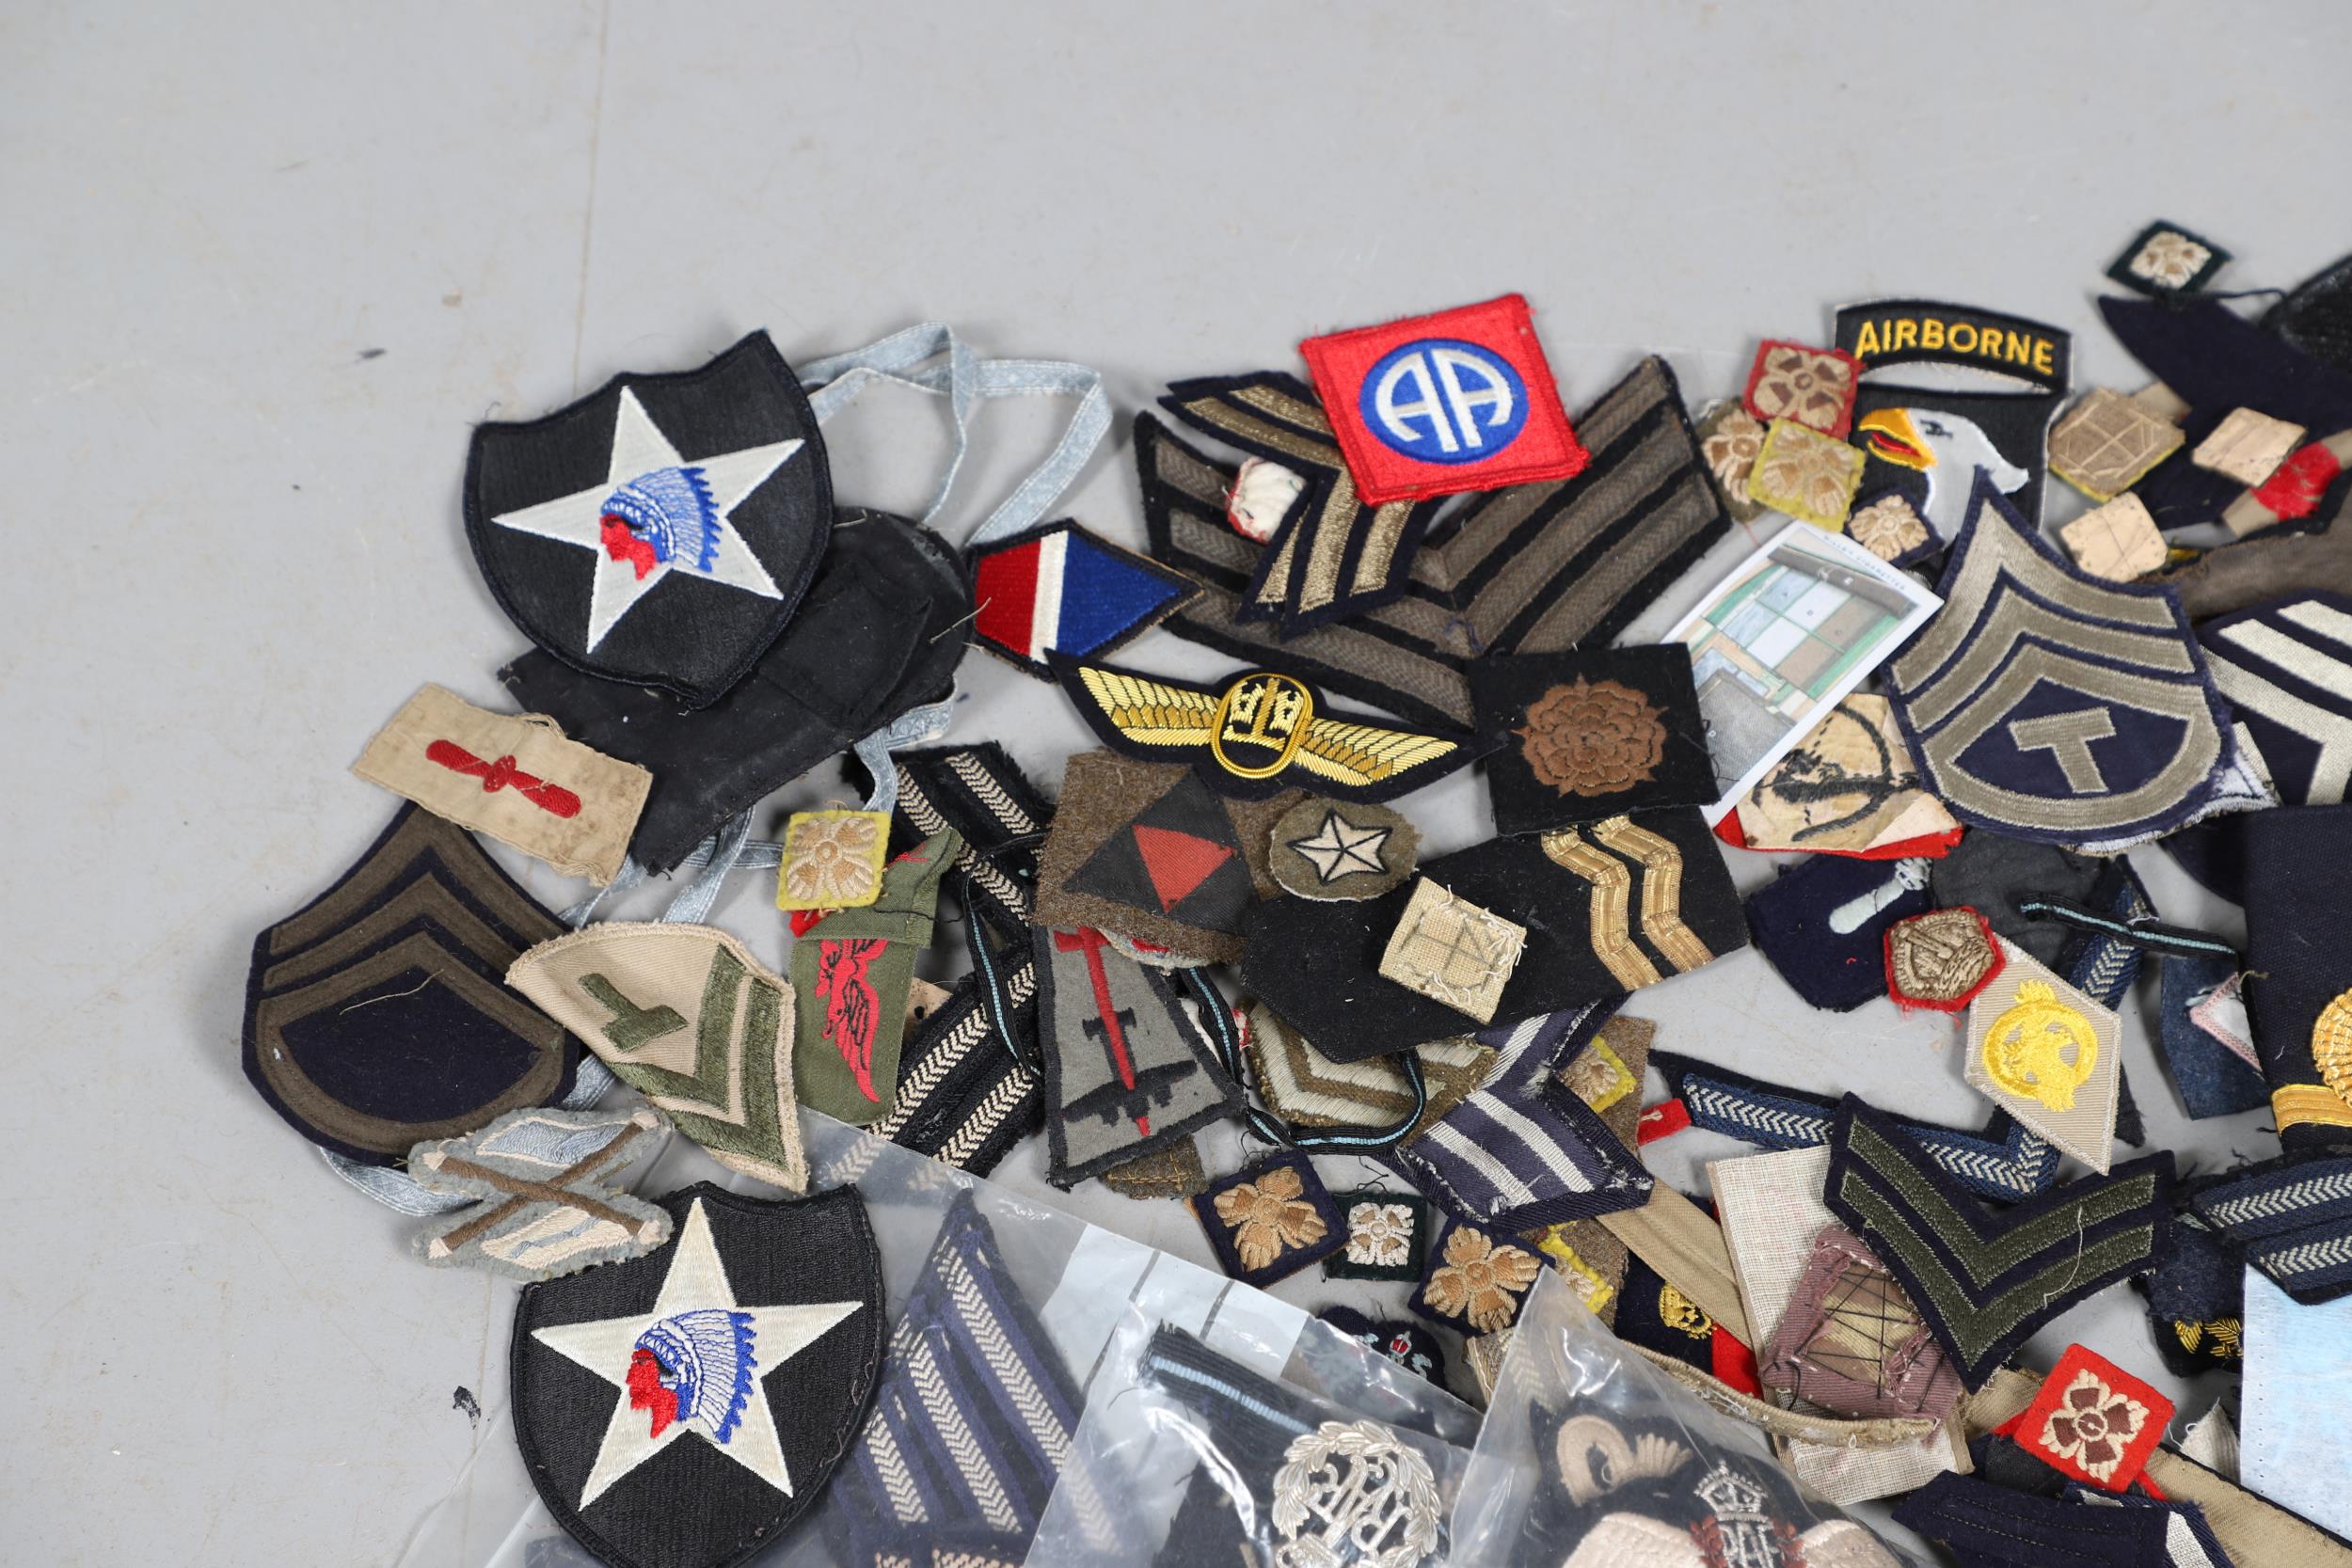 AN EXTENSIVE COLLECTION OF ARMY AND AIR FORCE UNIFORM PATCHES AND RANK INSIGNIA. - Bild 4 aus 14